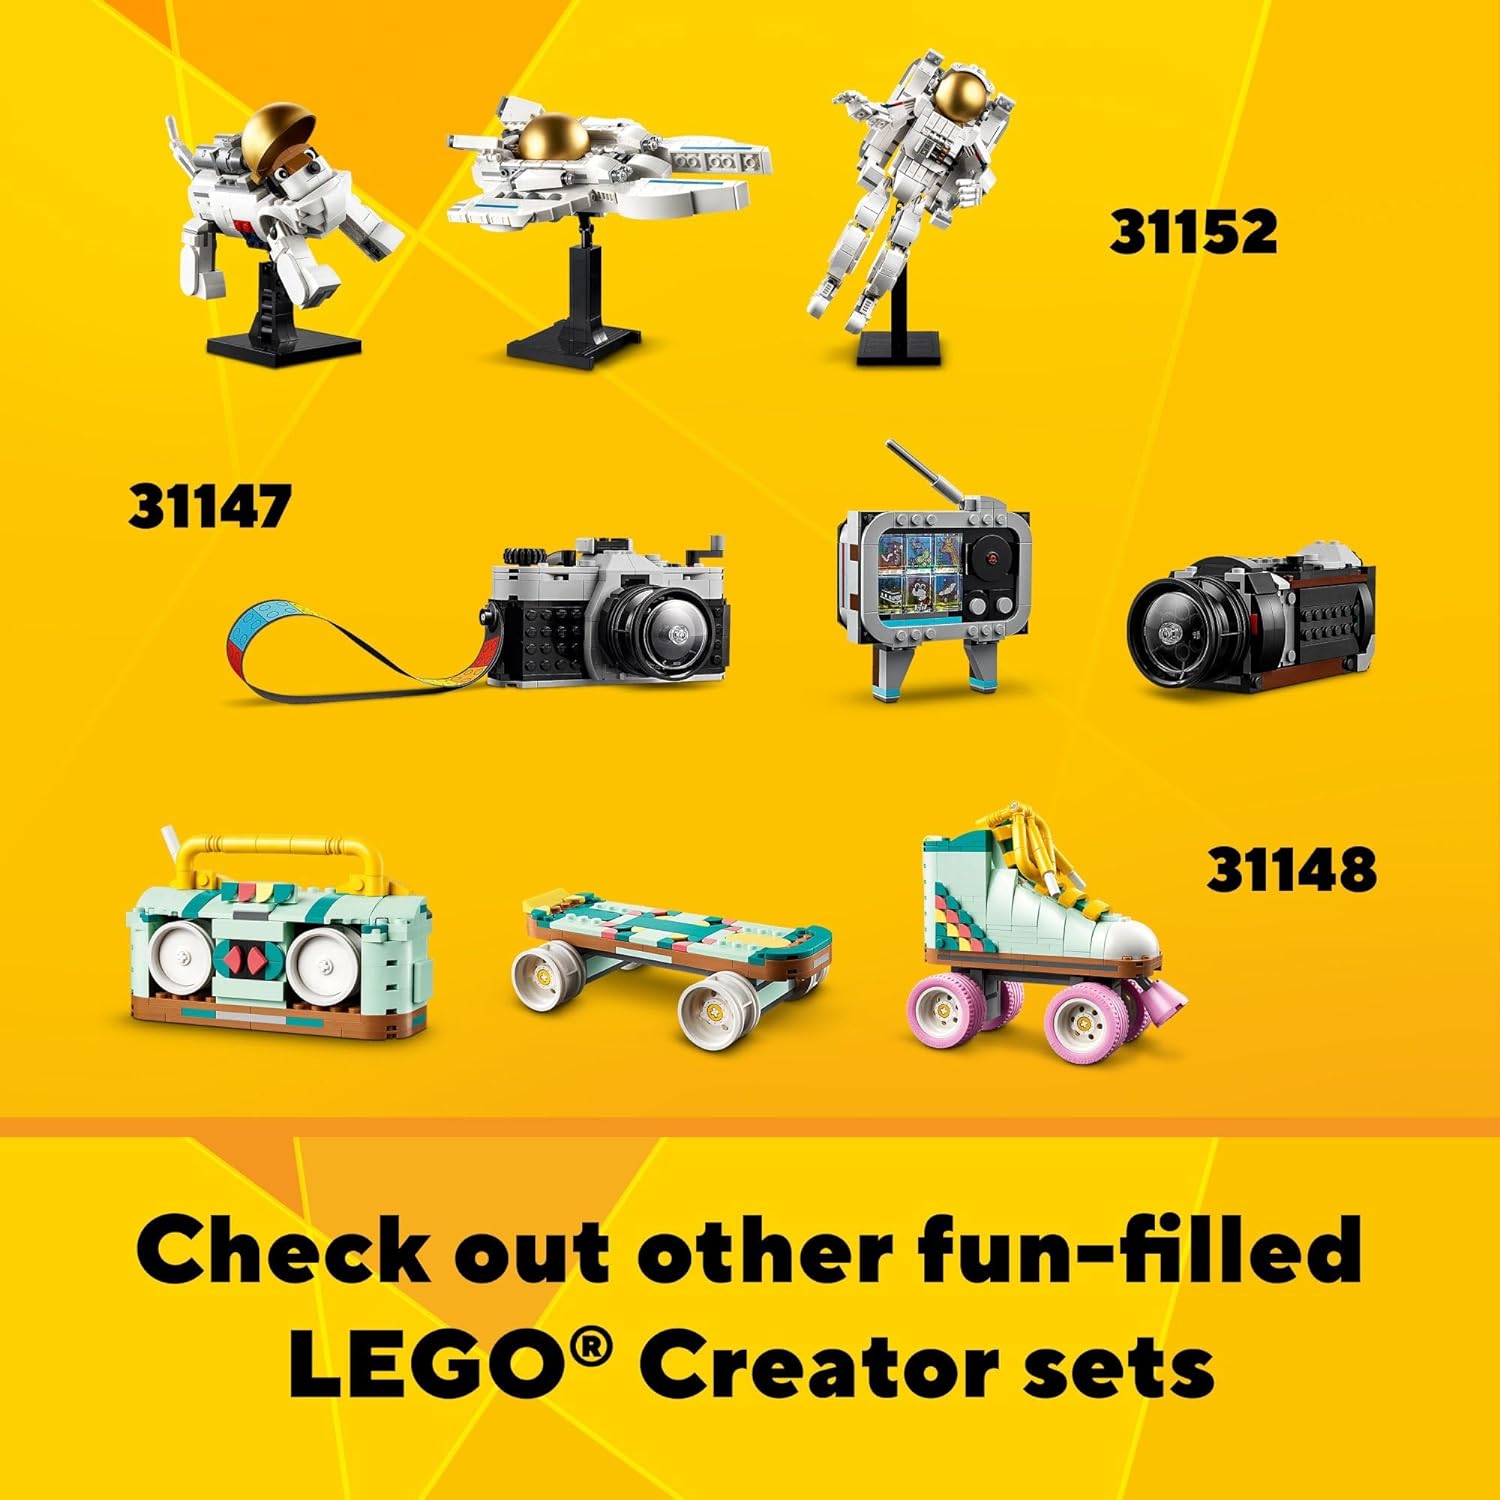 LEGO 31149 Creator 3 in 1 Flowers in Watering Can Building Toy, Transforms into Rain Boot or 2 Birds, Fun Animal Toy Easter Gift for Kids, Easter Basket Stuffers.